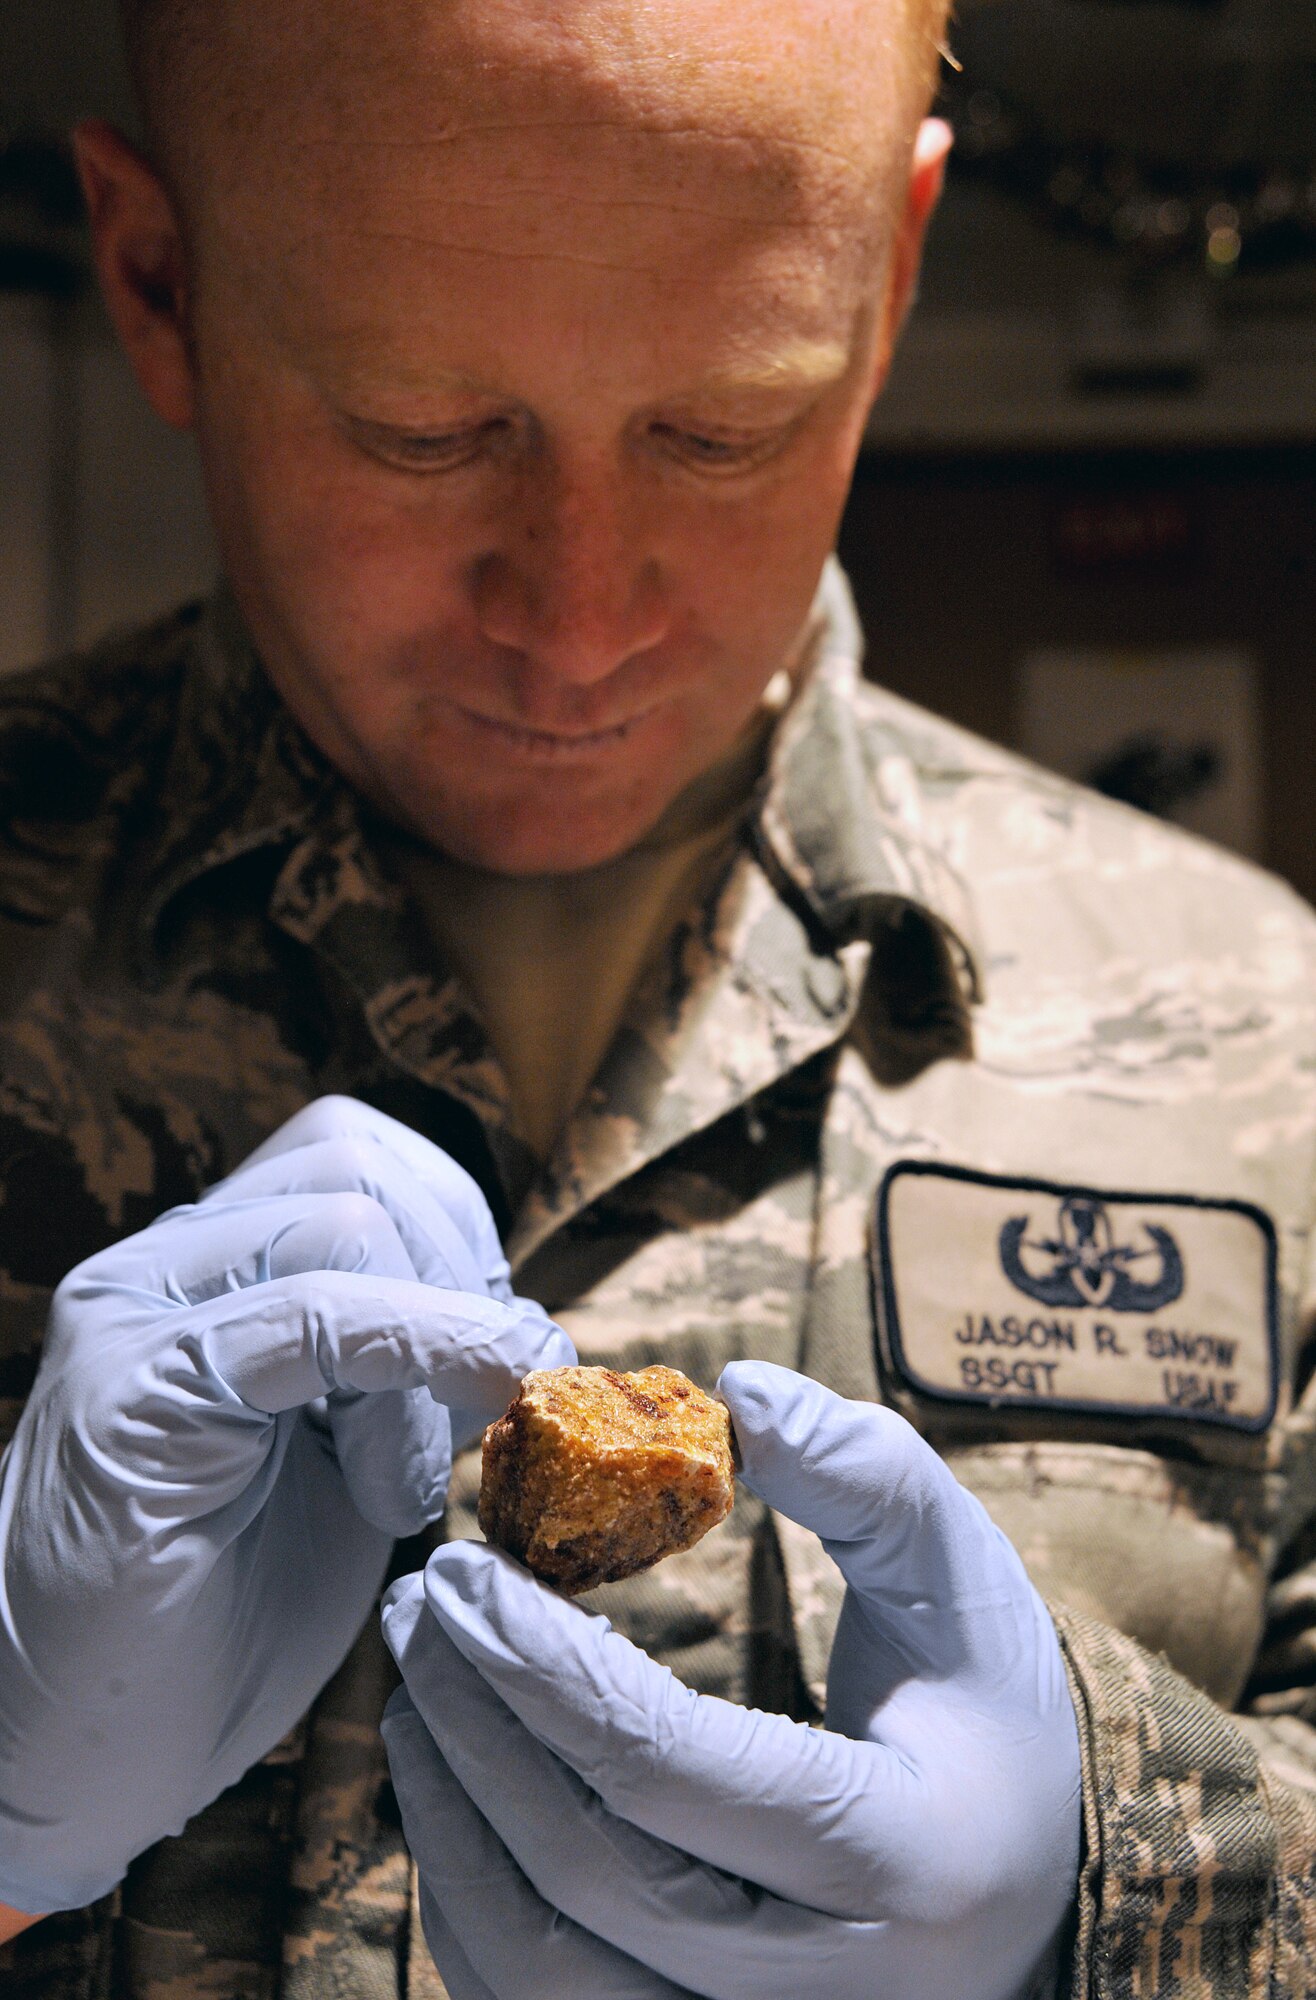 Staff Sgt. Jason Snow looks closely at an unknown substance Dec. 26, 2010, on Camp Victory, Iraq. Sergeant Snow is the NCO in charge of the Combined Explosive Exploitation Cell triage laboratory for Combined Joint Task Force Troy. CJTF Troy is dedicated to countering IEDs and saving lives of Iraqi and joint forces conducting Operation New Dawn, and one key responsibility of CJTF Troy and CEXC members is neutralizing the threat of improvised explosive devices through collection and exploitation of IED evidence and related intelligence. (U.S. Air Force photo/Senior Airman Andrew Lee)